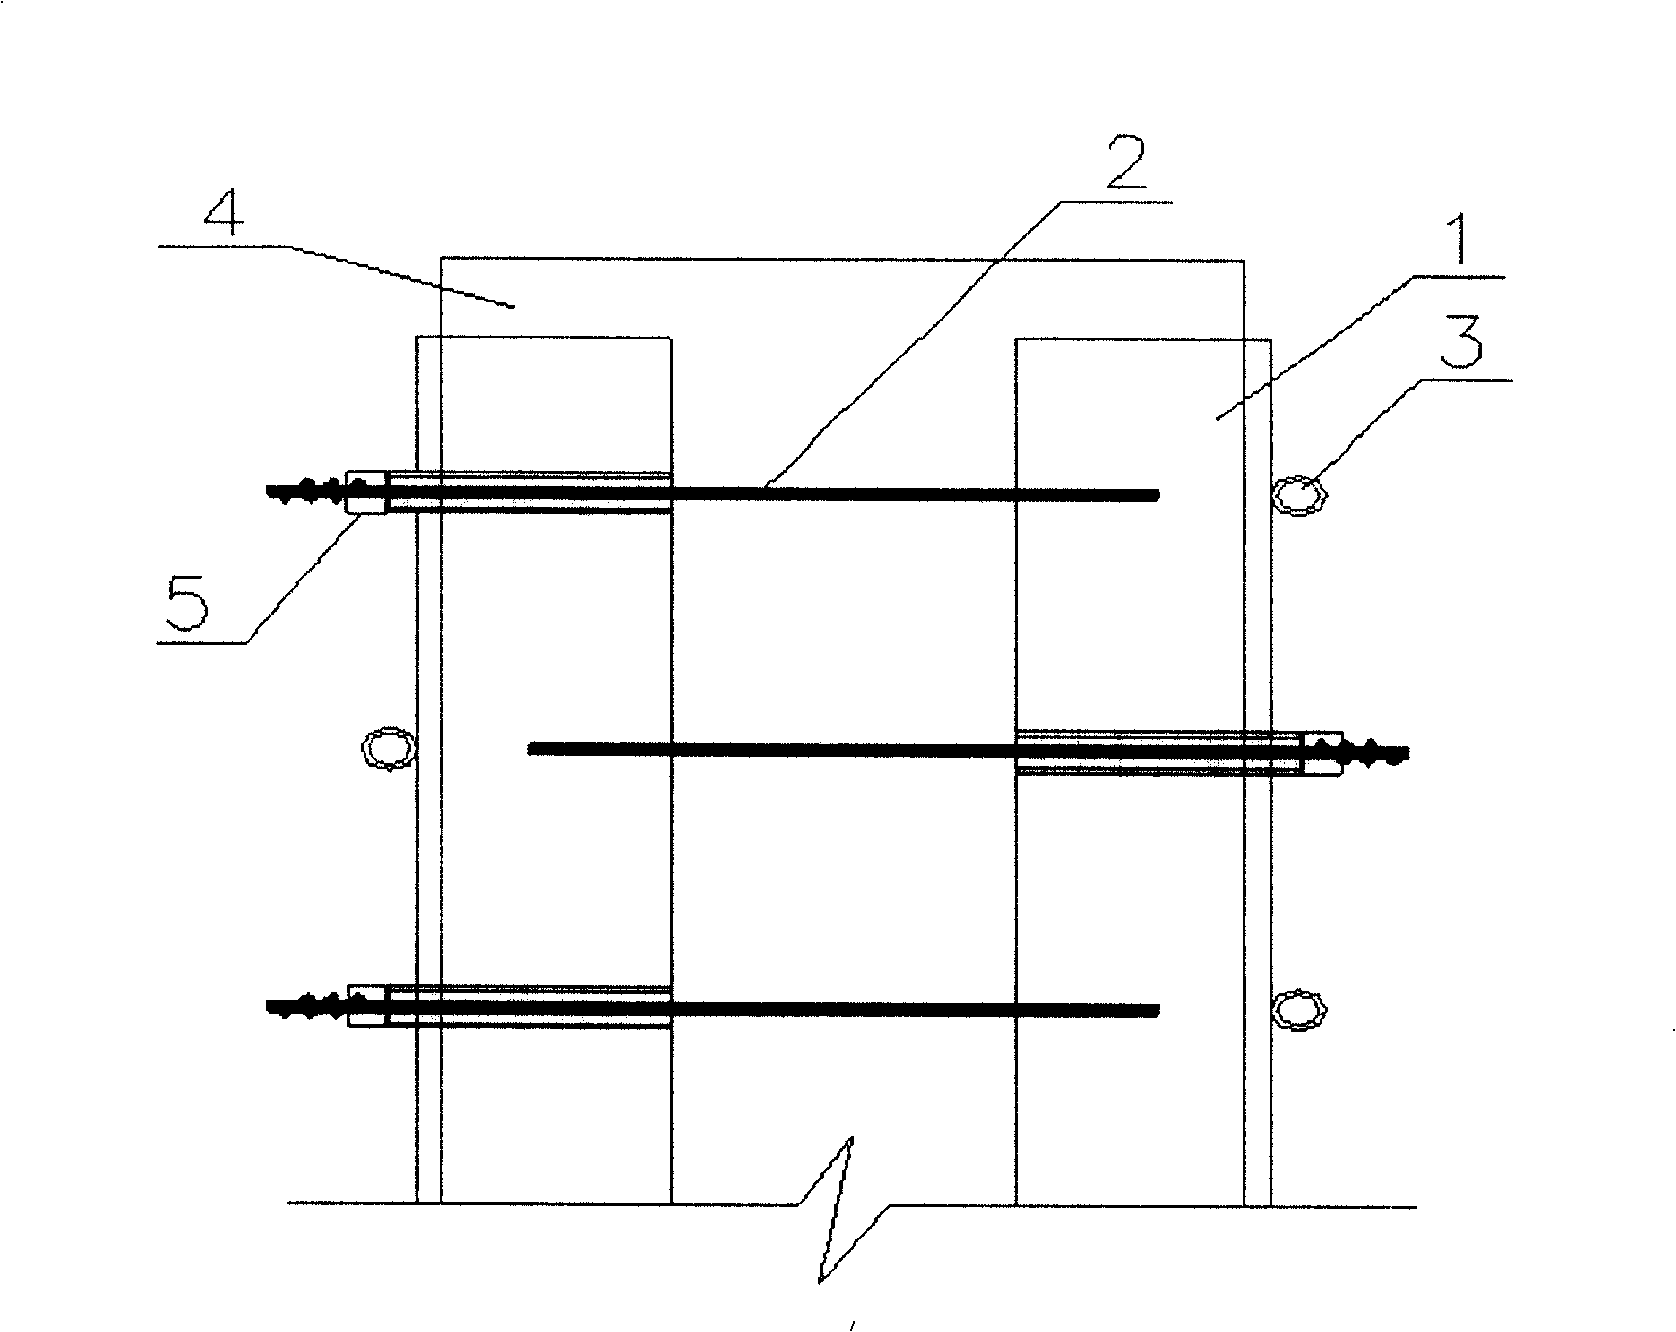 Method and structure for reinforcing concrete post using angle steel